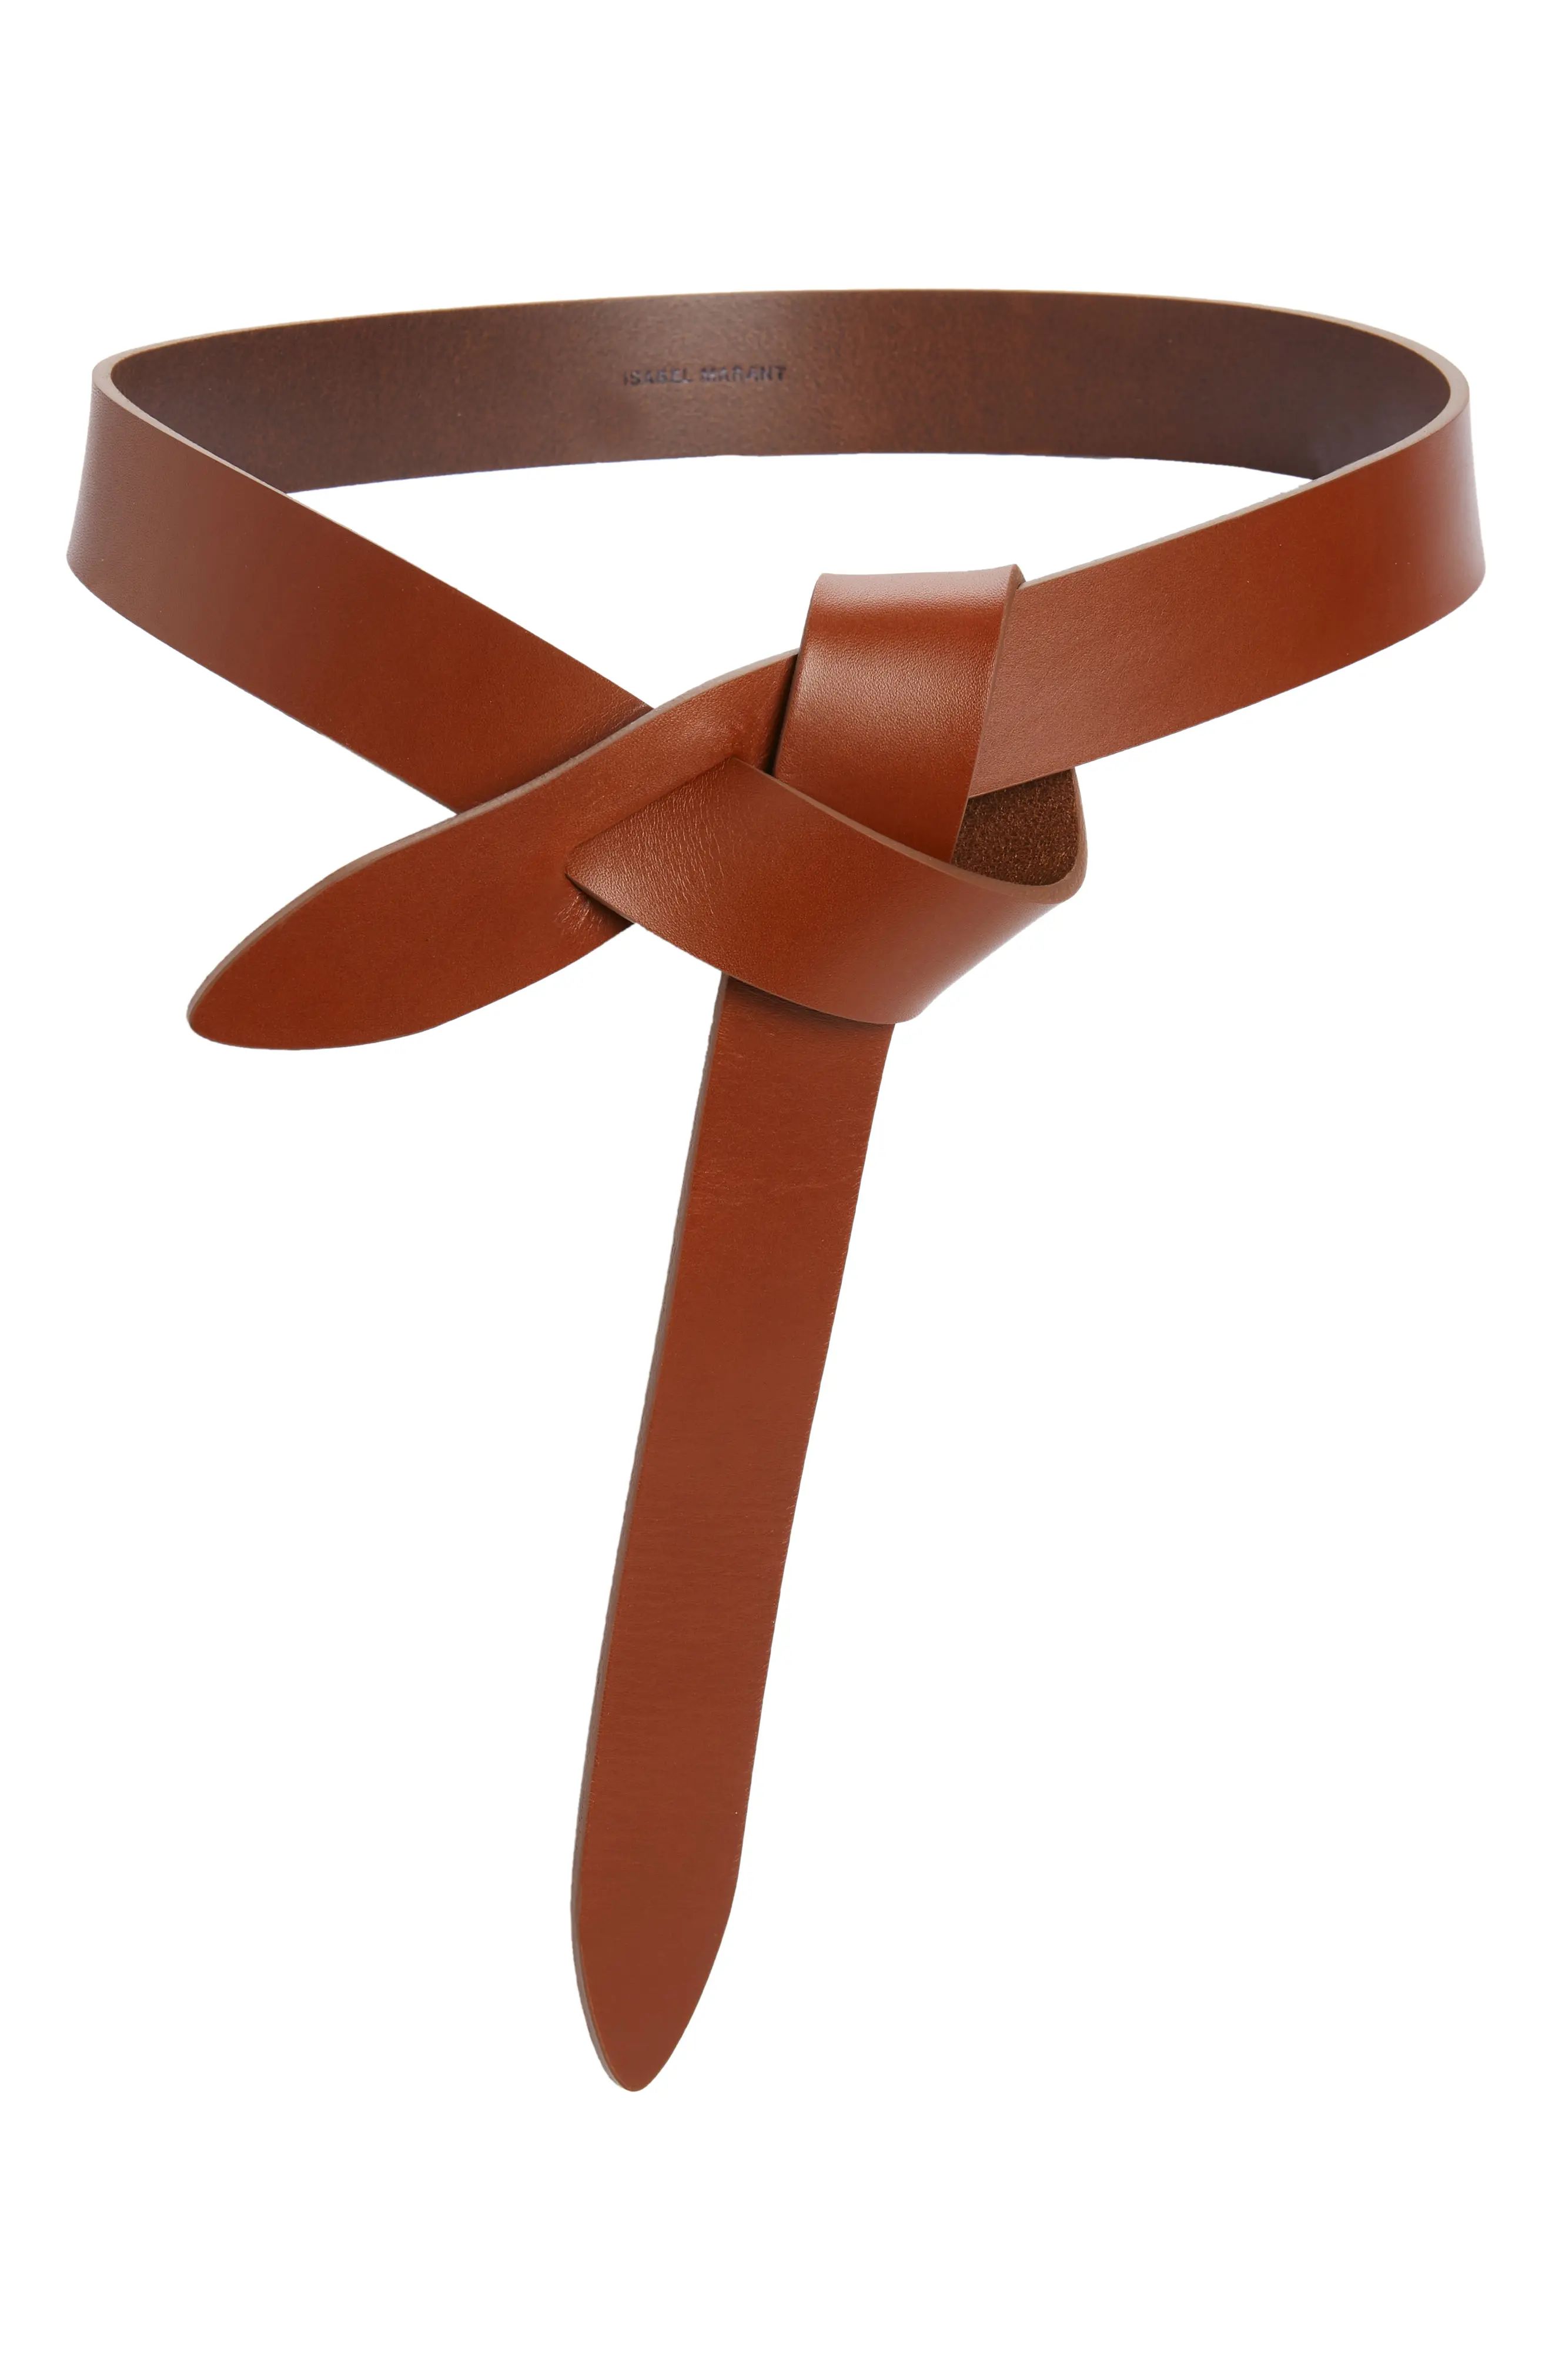 Isabel Marant Lecce Leather Belt in Brown at Nordstrom, Size Small | Nordstrom